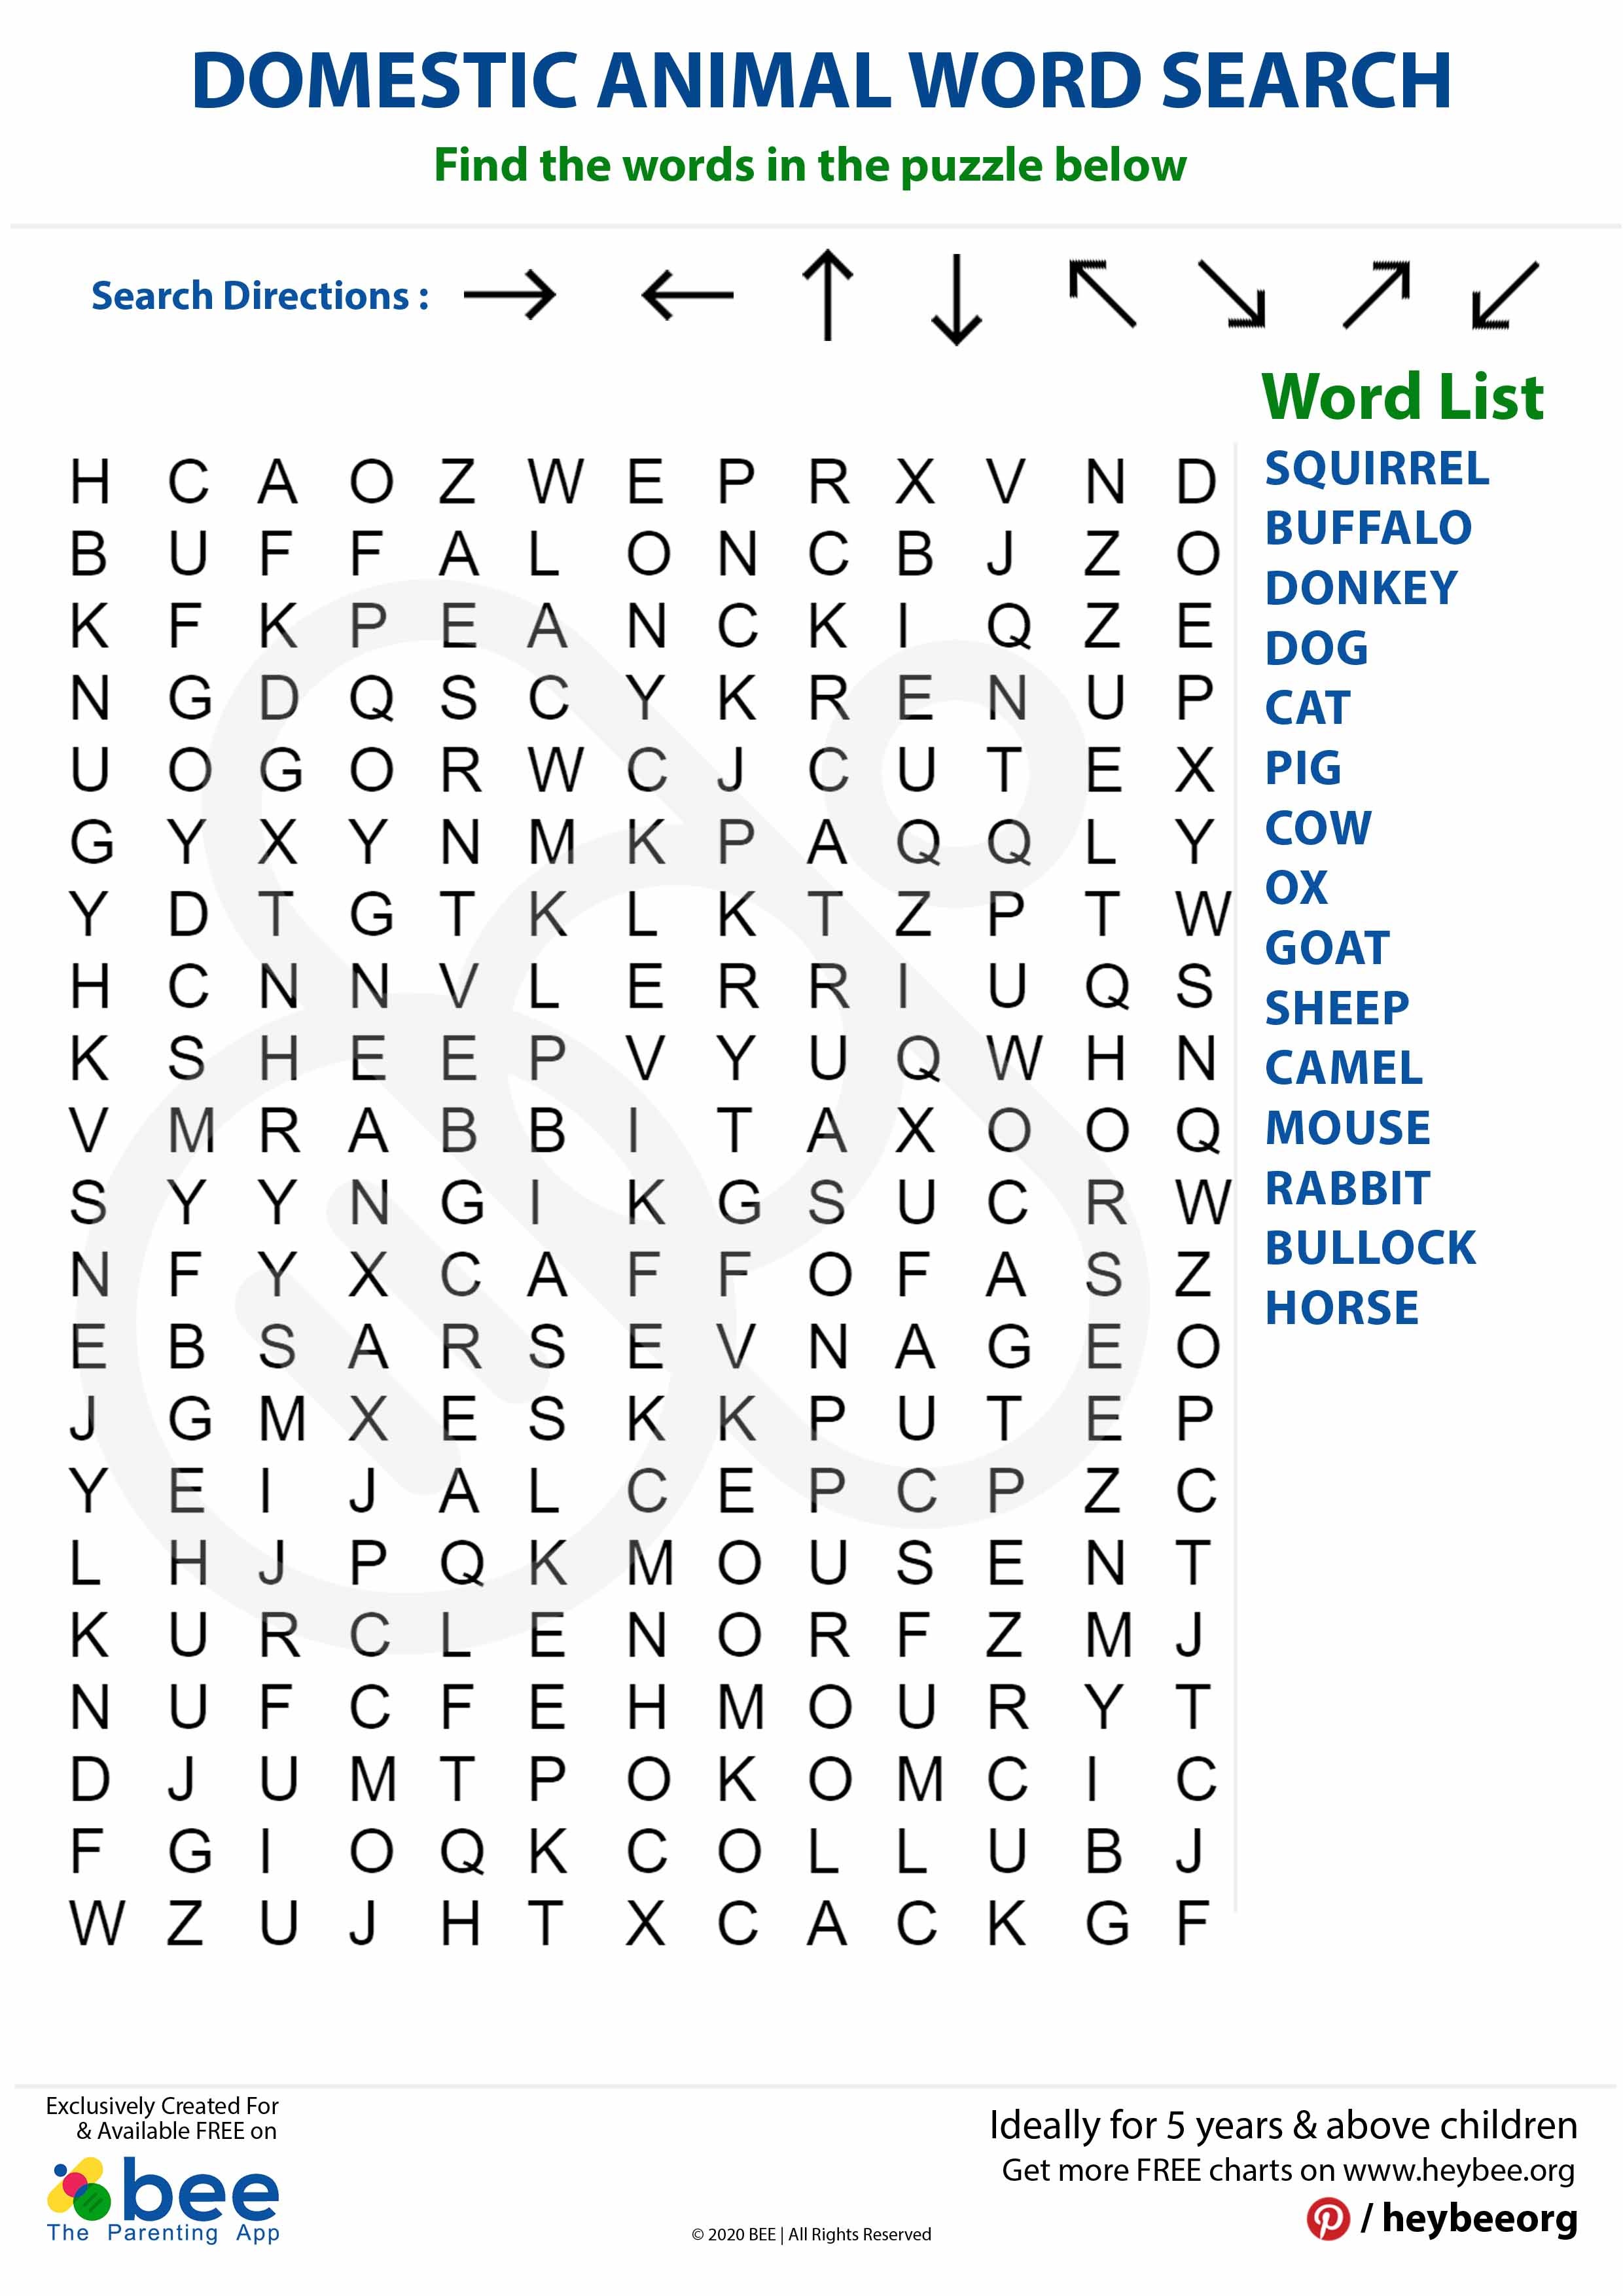 Domestic Animal Word Search